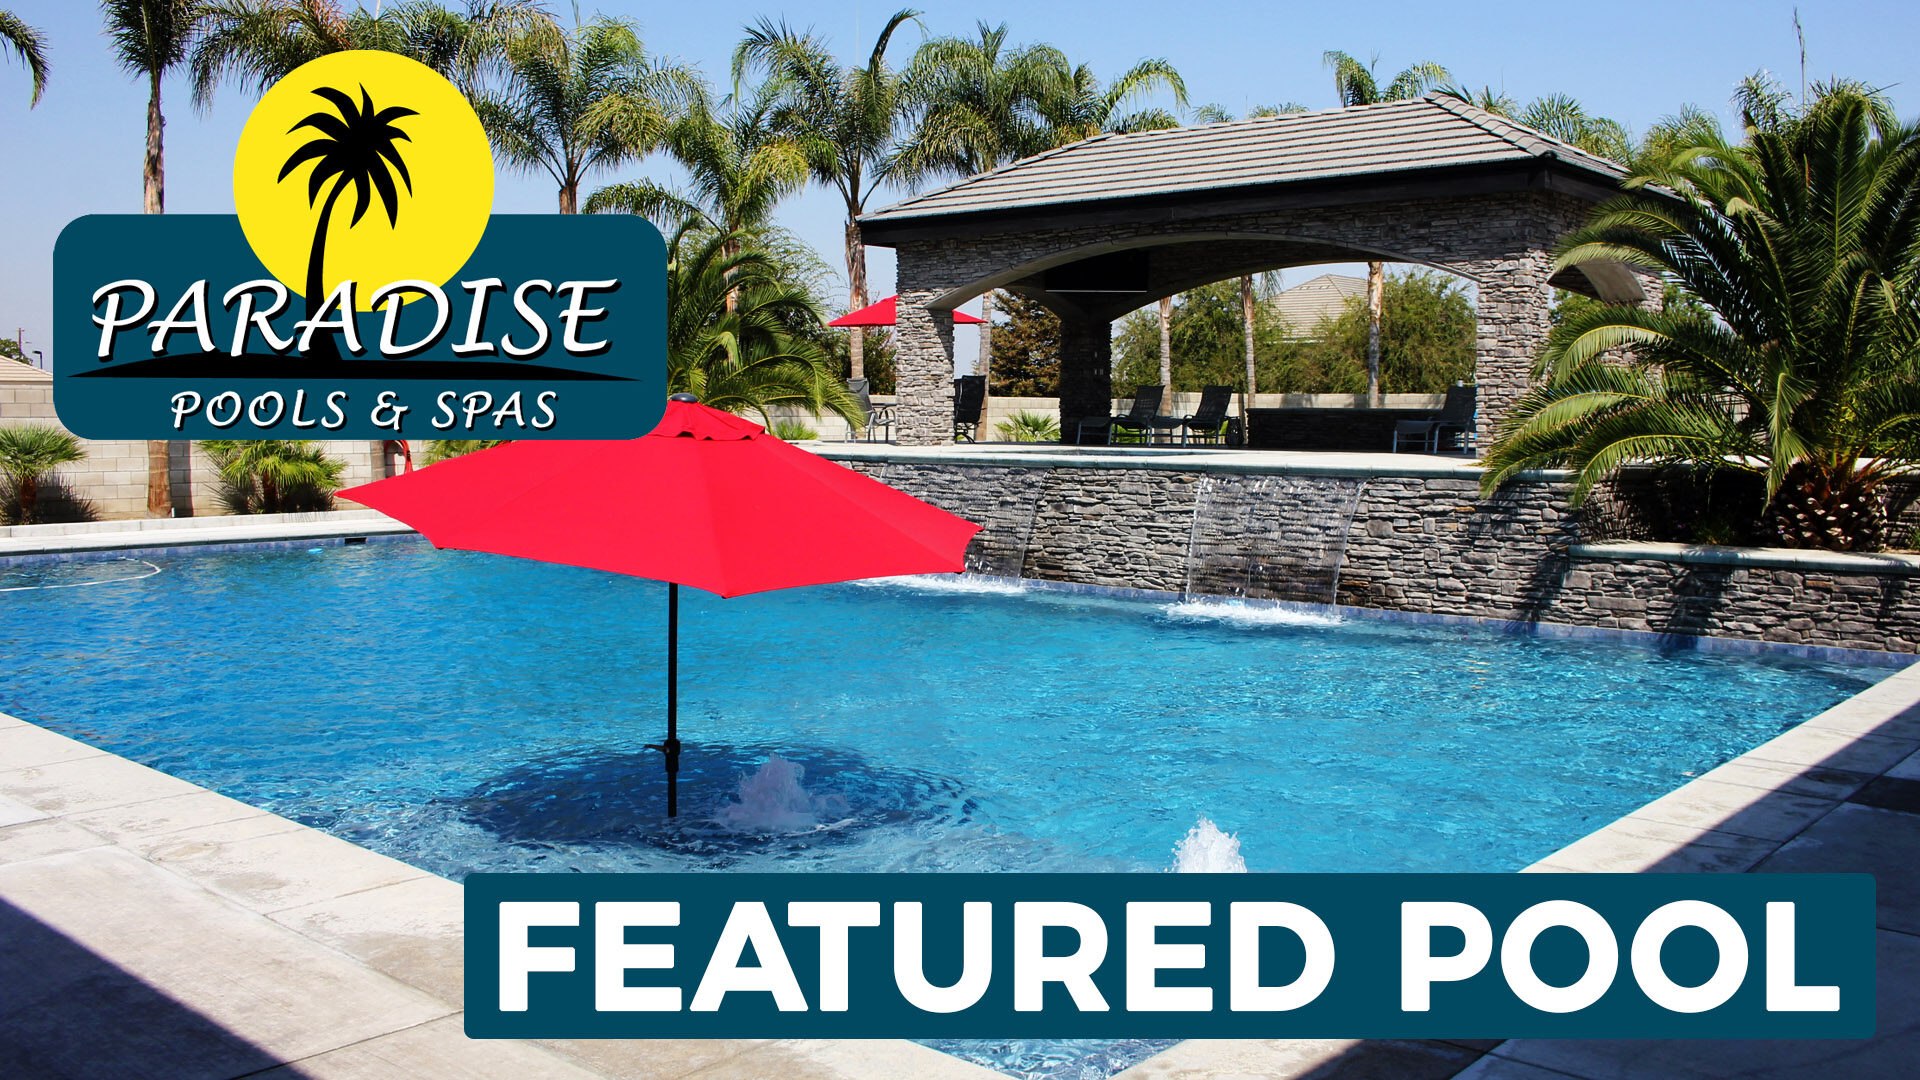 Massive, deep swimming pool with water features, spa and red umbrellas built by Paradise Pools & Spas.